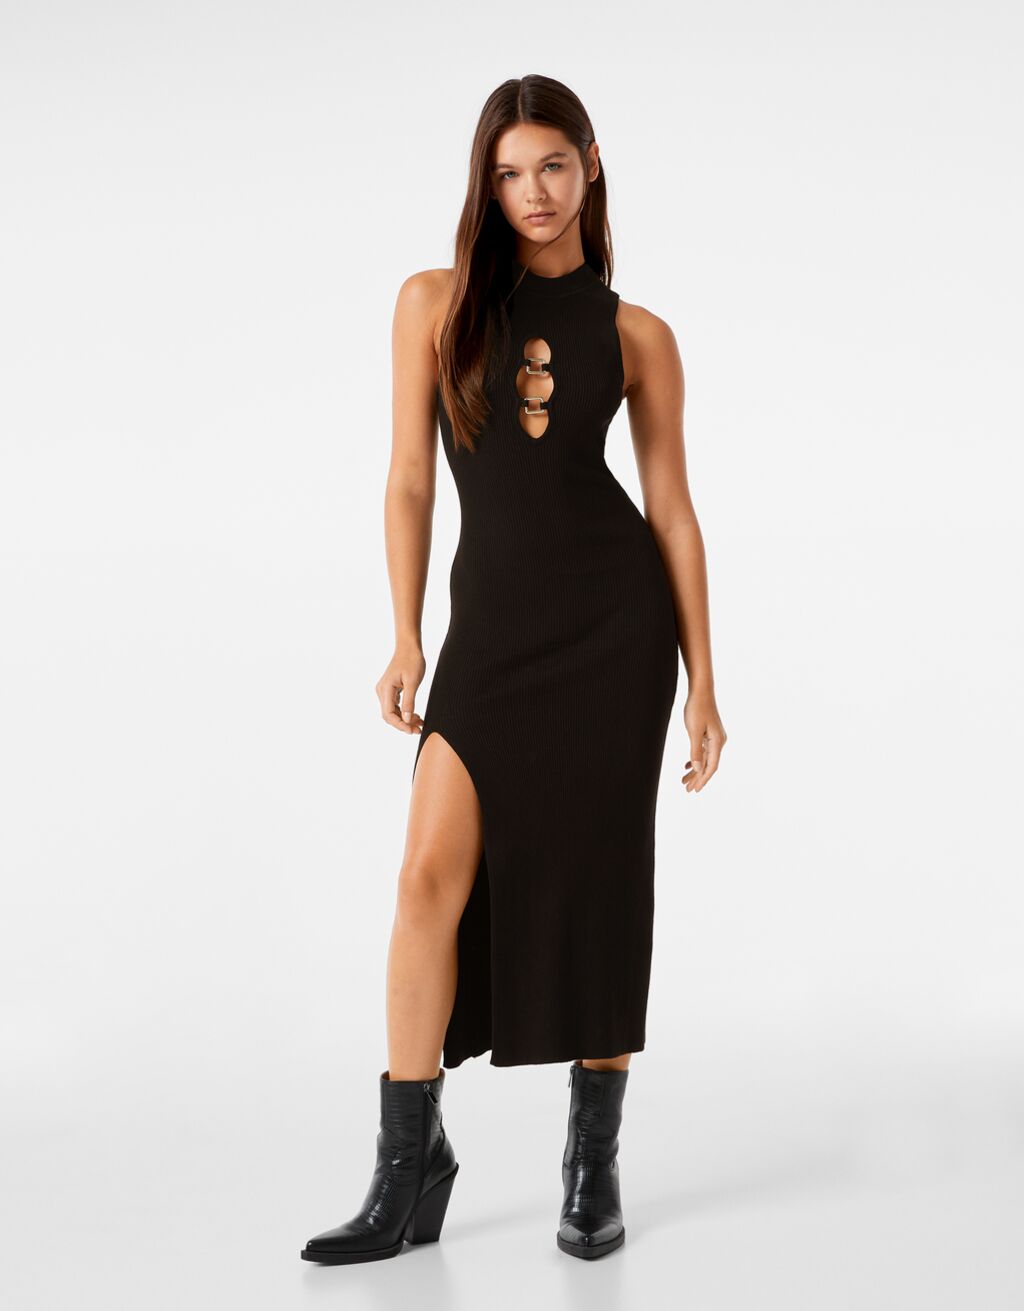 Sleeveless midi dress with cut-out neckline